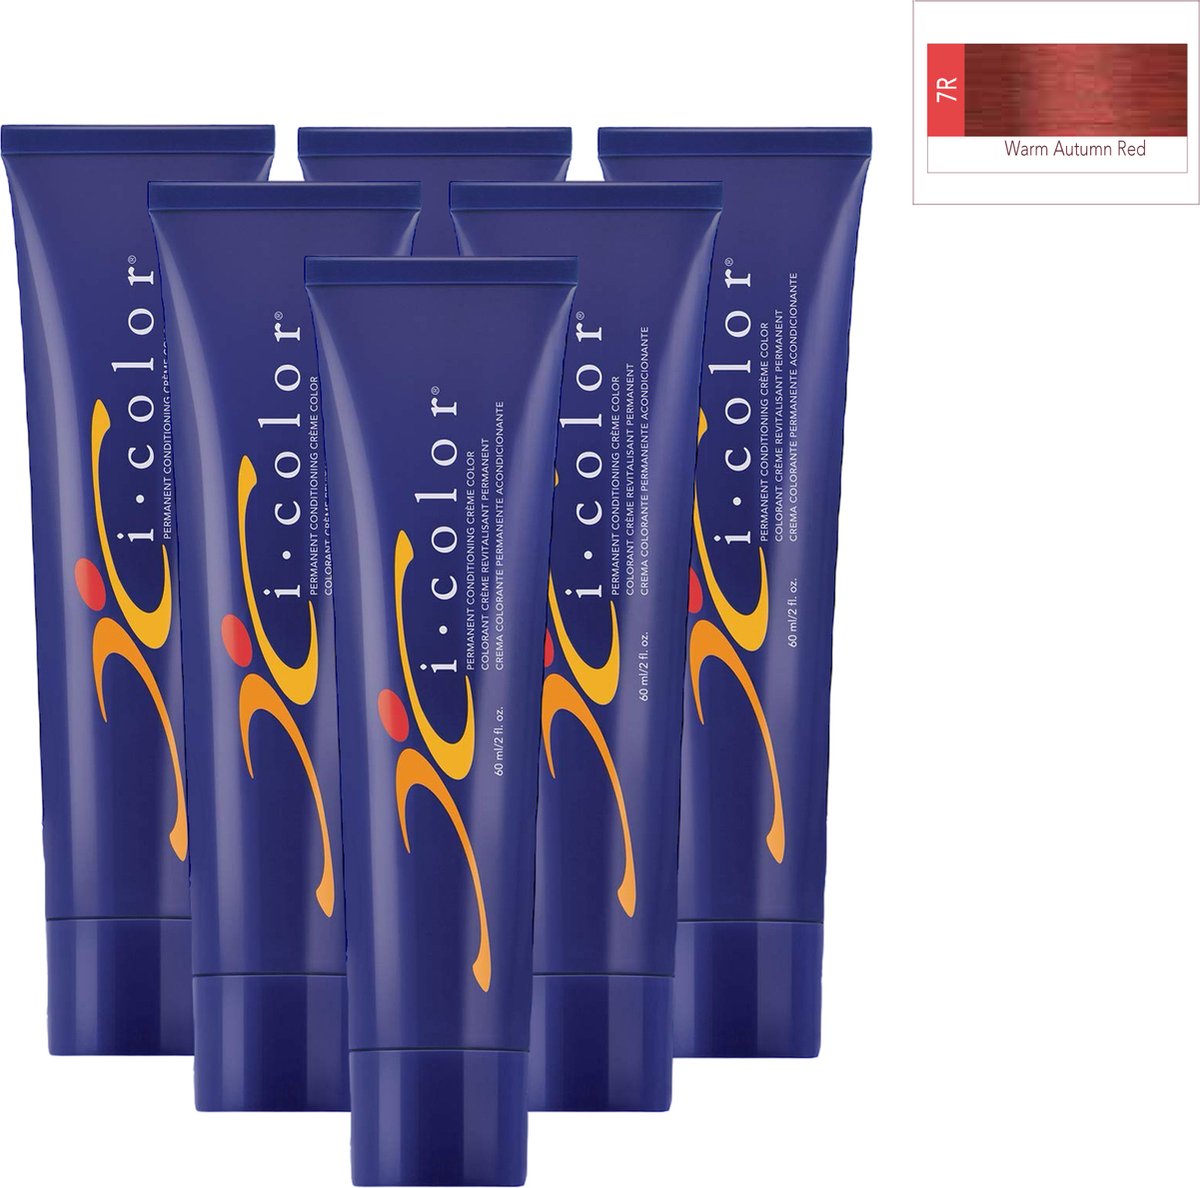 ISO i color Permanent Conditioning Crème Color 60ml 7R (7.5) Warm Autumn Red x 6 tubes